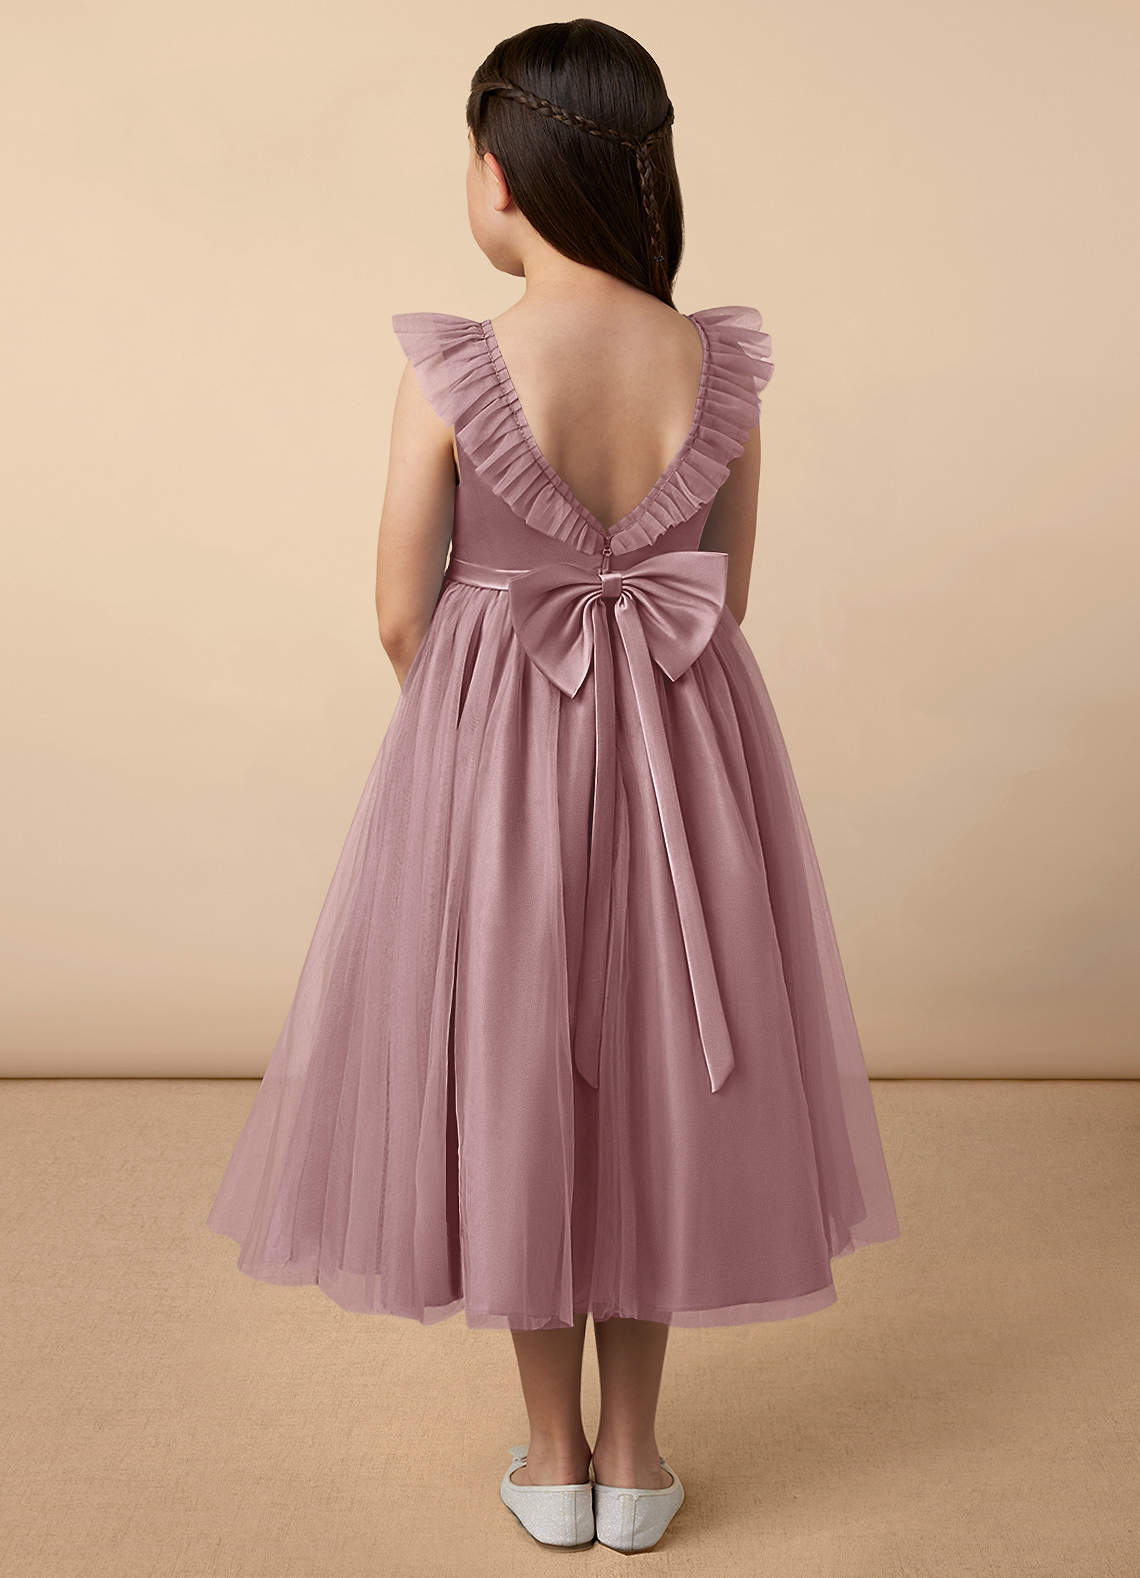 Azazie Dolly Flower Girl Dresses A-Line Bow Tulle Ankle-Length Dress image1